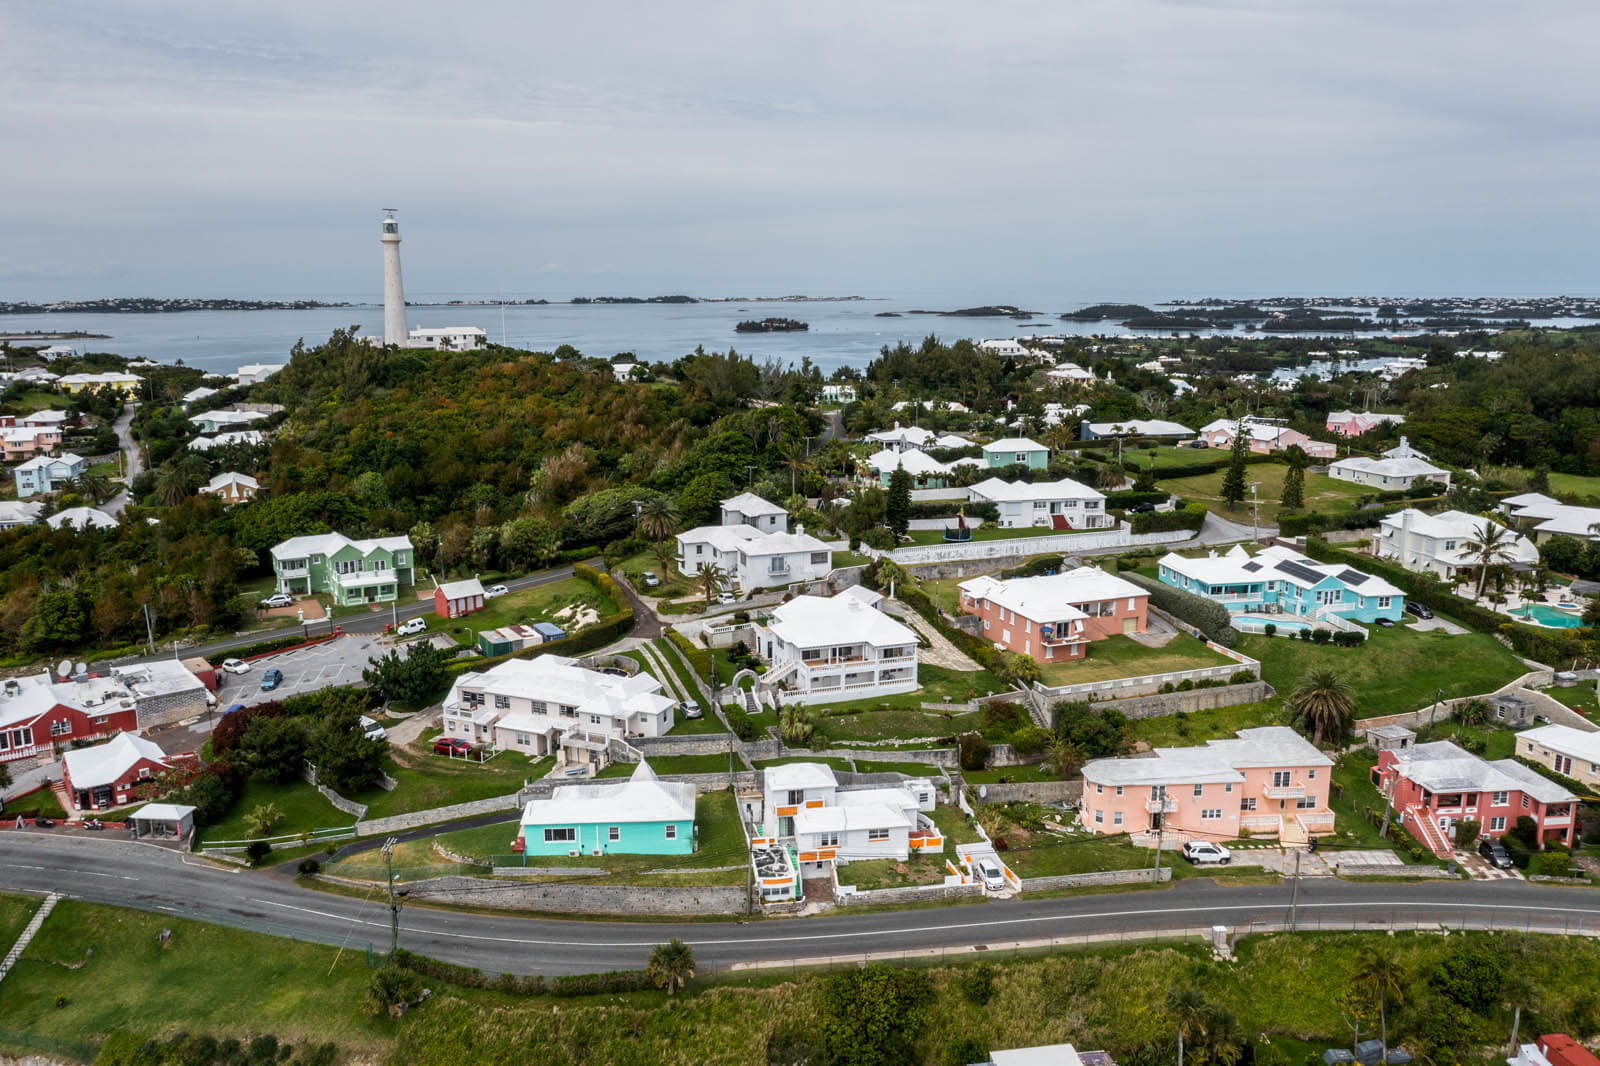 Gibb's Lighthouse from Sinky Bay with Colorful Homes in Bermuda